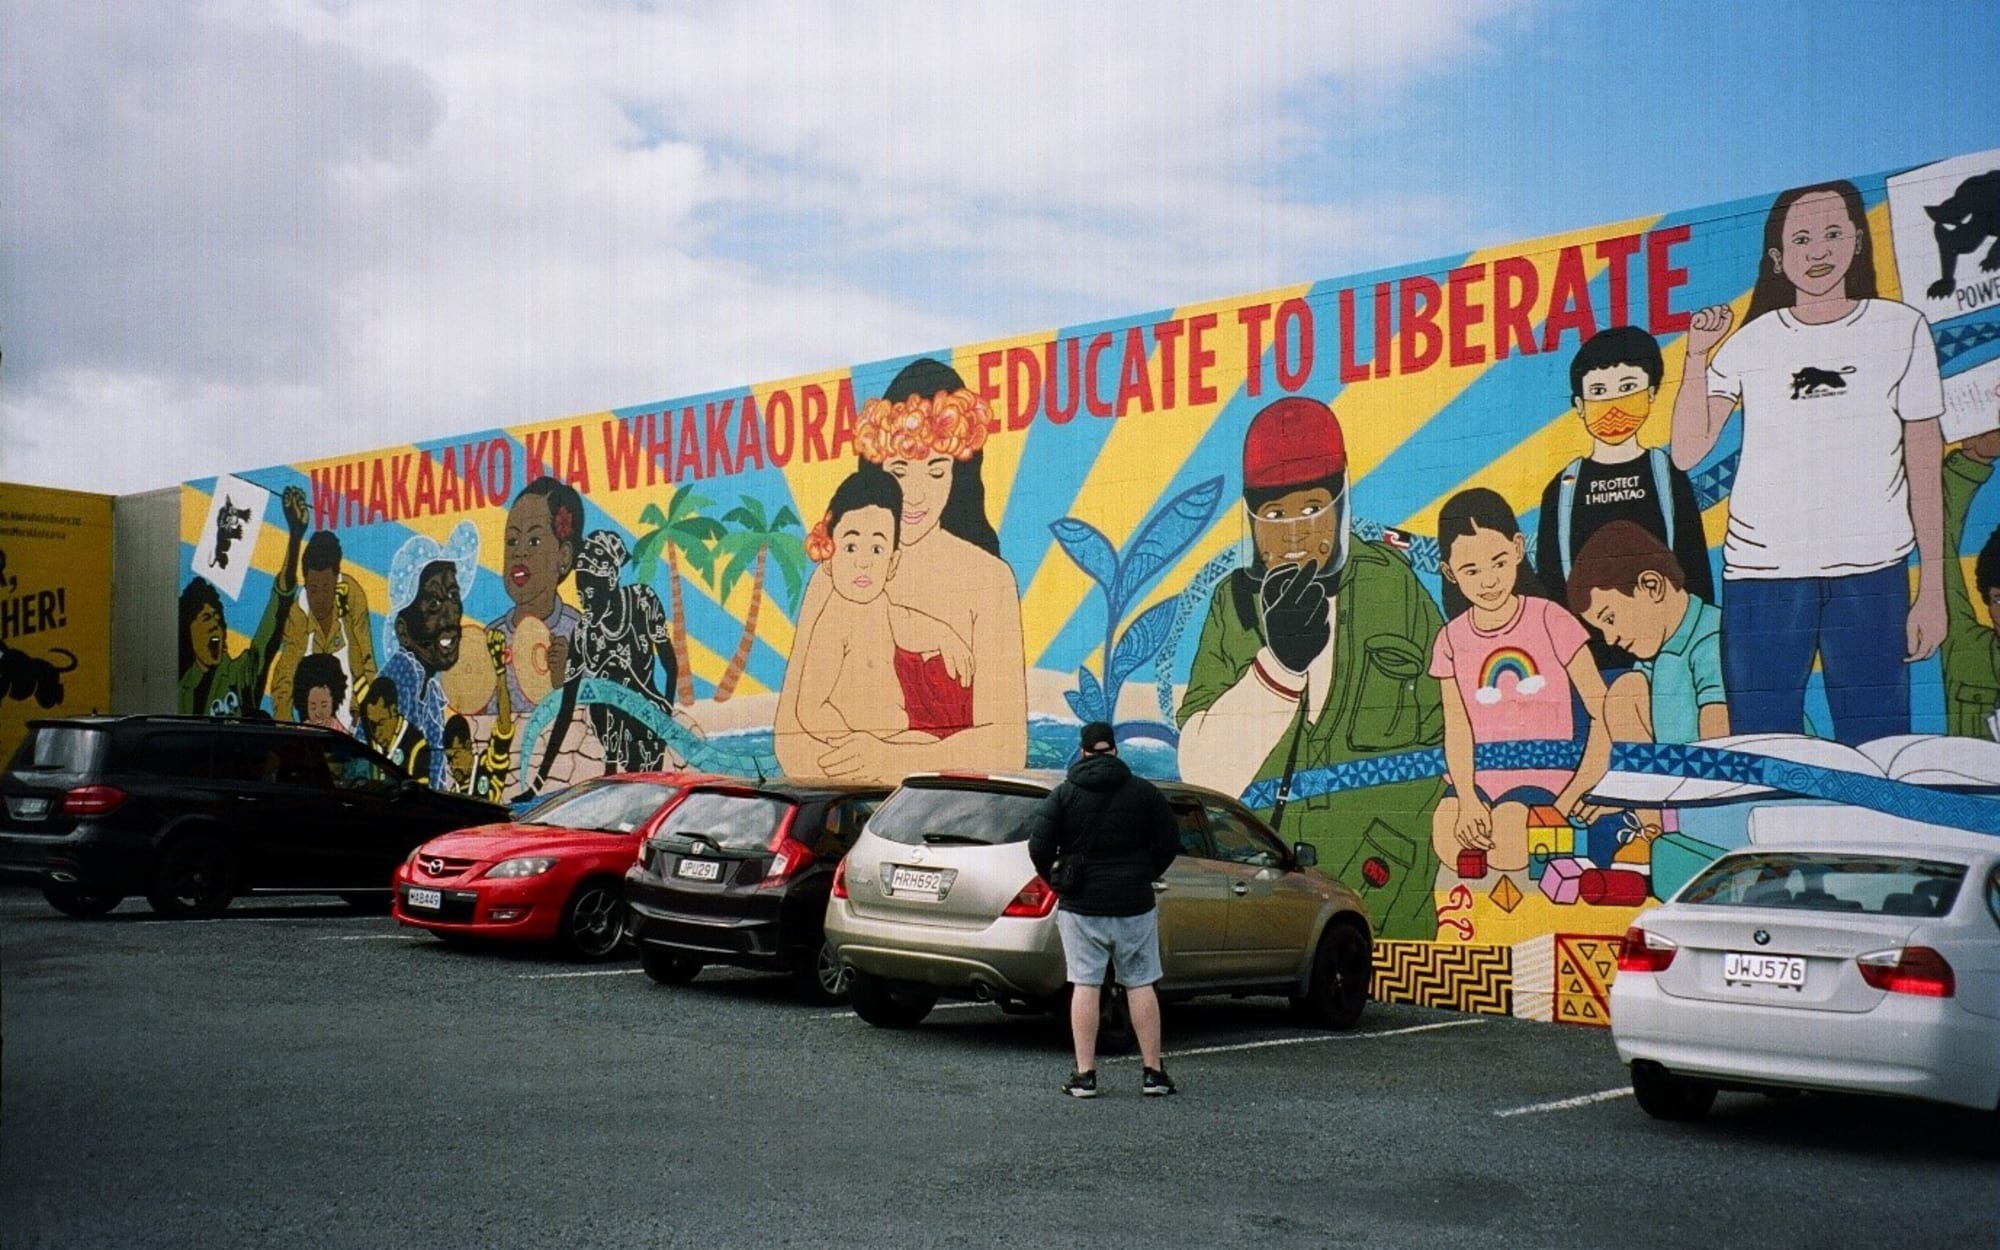 Educate to Liberate mural in south Auckland.